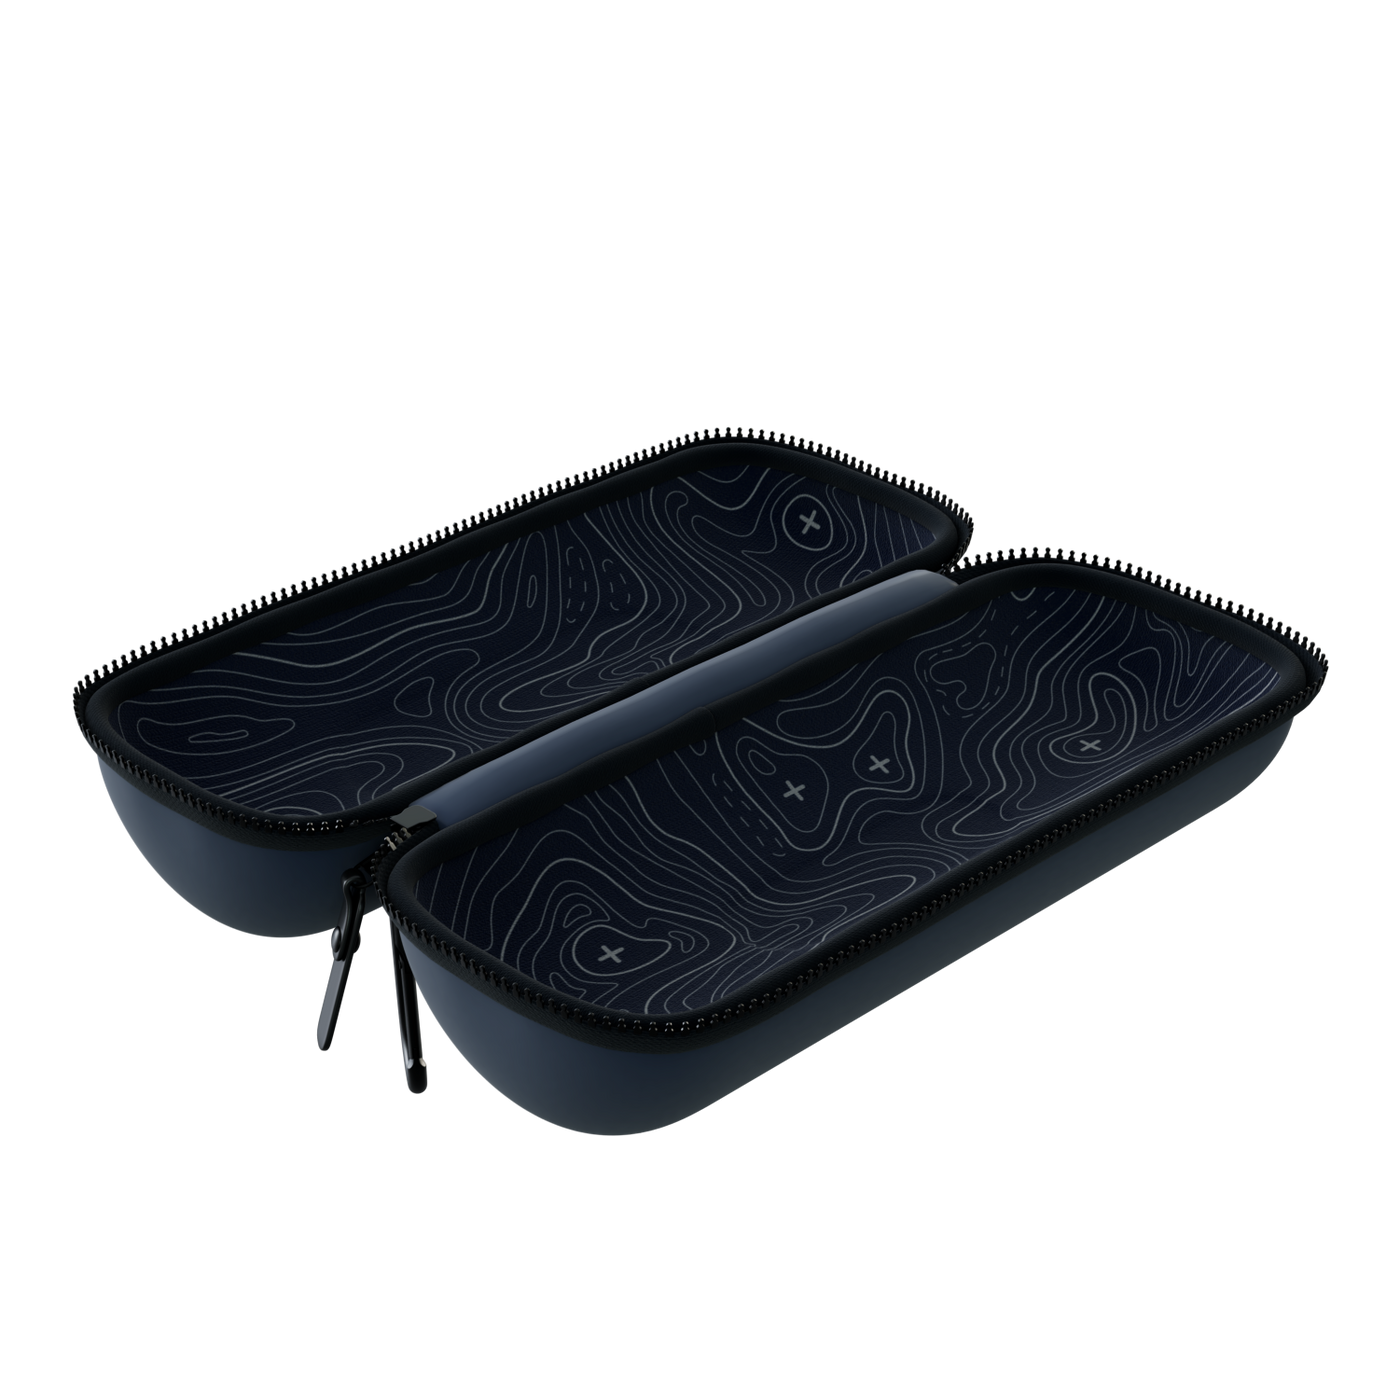 PLAYER+ HARD SHELL  CARRYING CASE